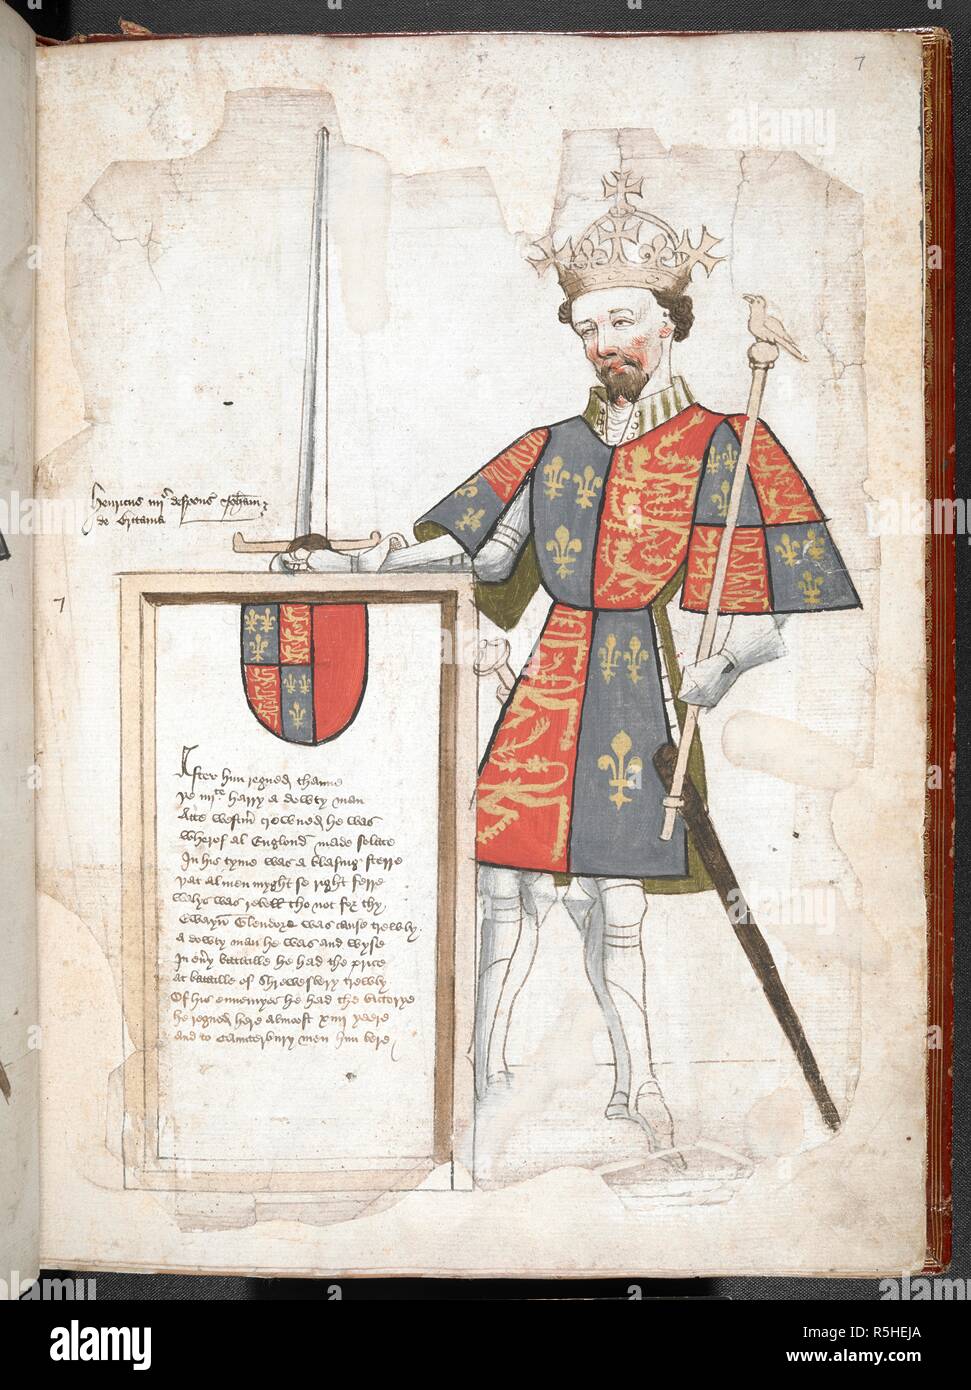 Coloured drawing of an English king in armour and tabard (Henry IV), presenting a plaque with verses. Sir Thomas Holme's Book of Arms: anonymous verses on the kings of England ... (Part 1 folios 1 to 8). England, S. E. (probably London); c. 1445-c. 1450. Numerous coloured drawings of English kings in armour and tabard, presenting a plaque with verses. Source: Harley 4205 f.7. Language: English. Gothic cursive. Stock Photo